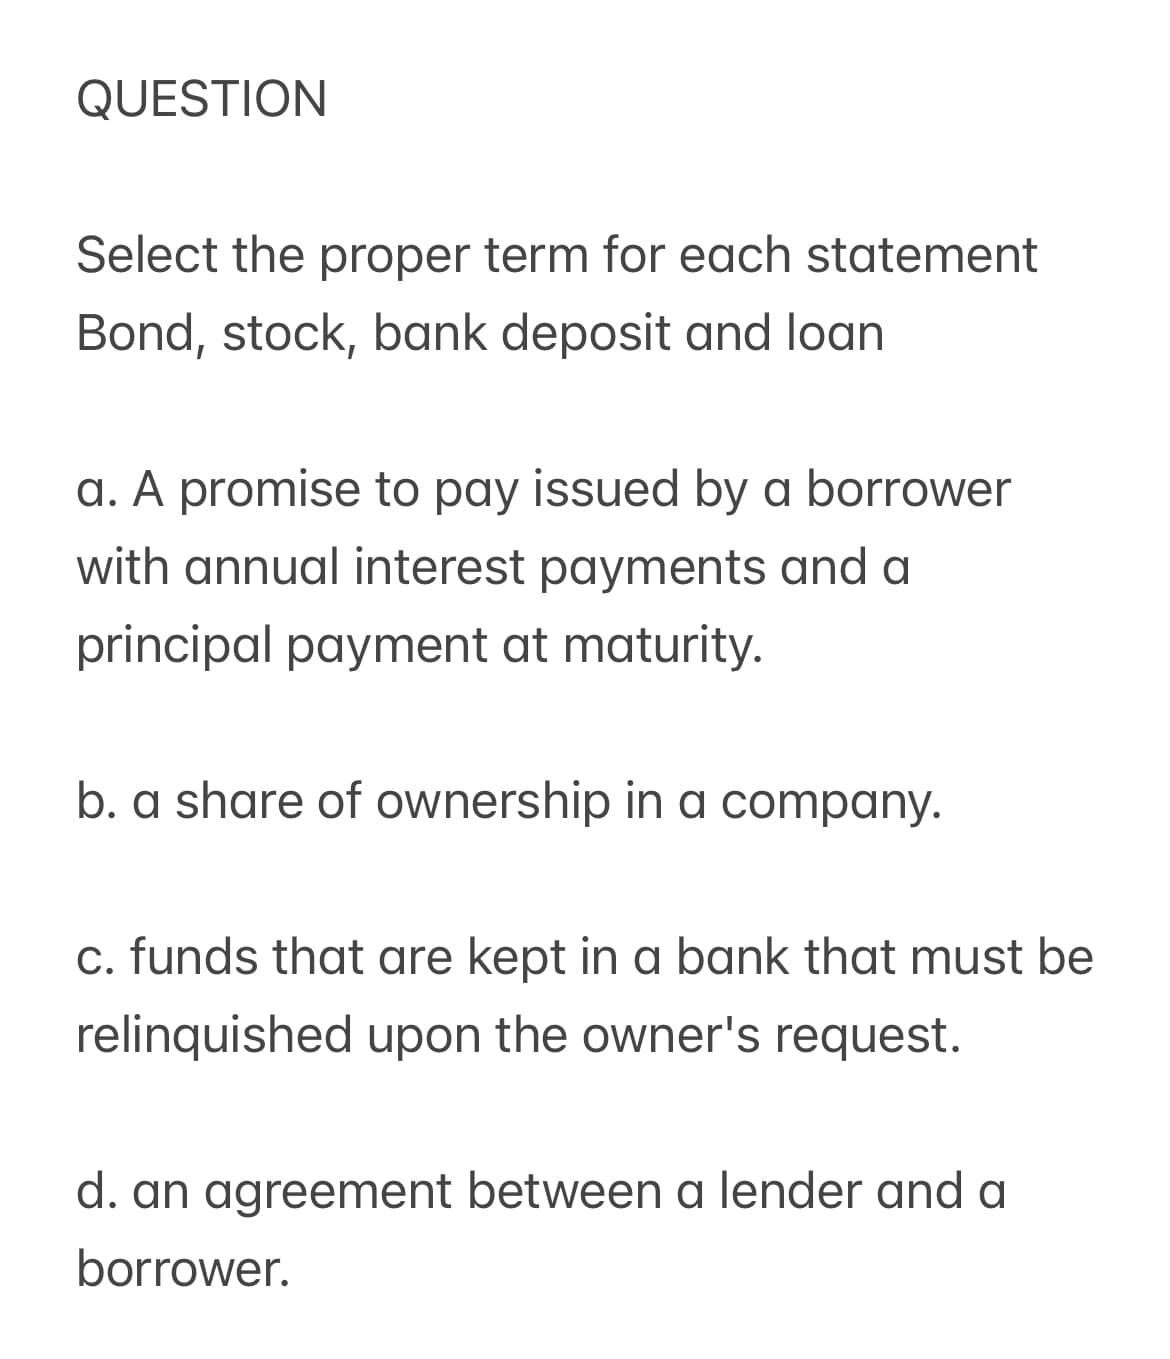 QUESTION
Select the proper term for each statement
Bond, stock, bank deposit and loan
a. A promise to pay issued by a borrower
with annual interest payments and a
principal payment at maturity.
b. a share of ownership in a company.
c. funds that are kept in a bank that must be
relinquished upon the owner's request.
d. an agreement between a lender and a
borrower.